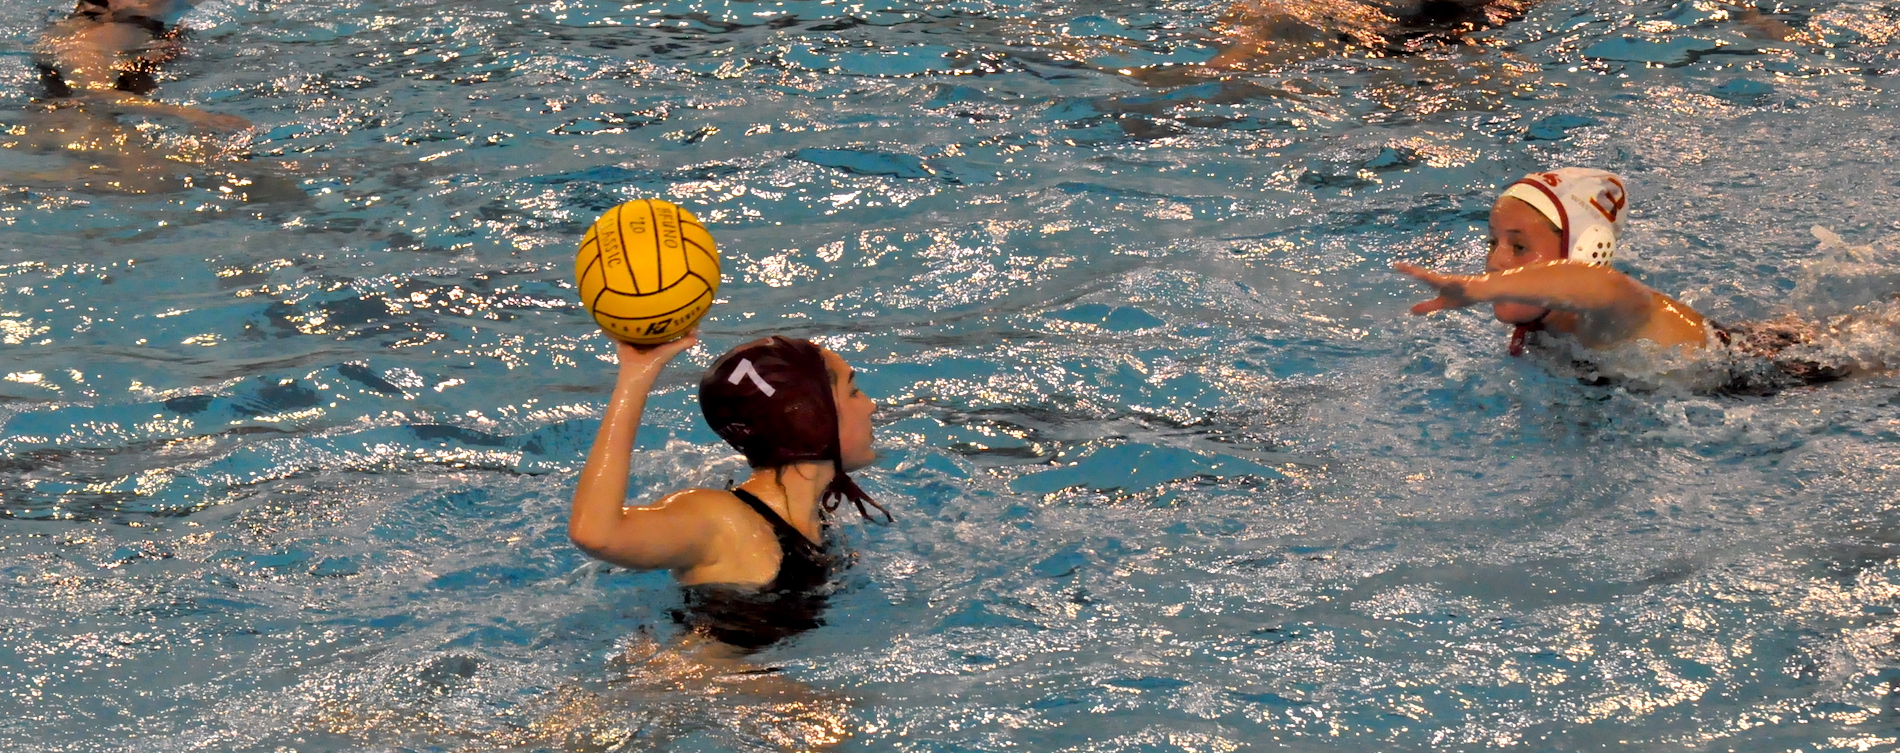 Austin College Edged by Siena and Bucknell